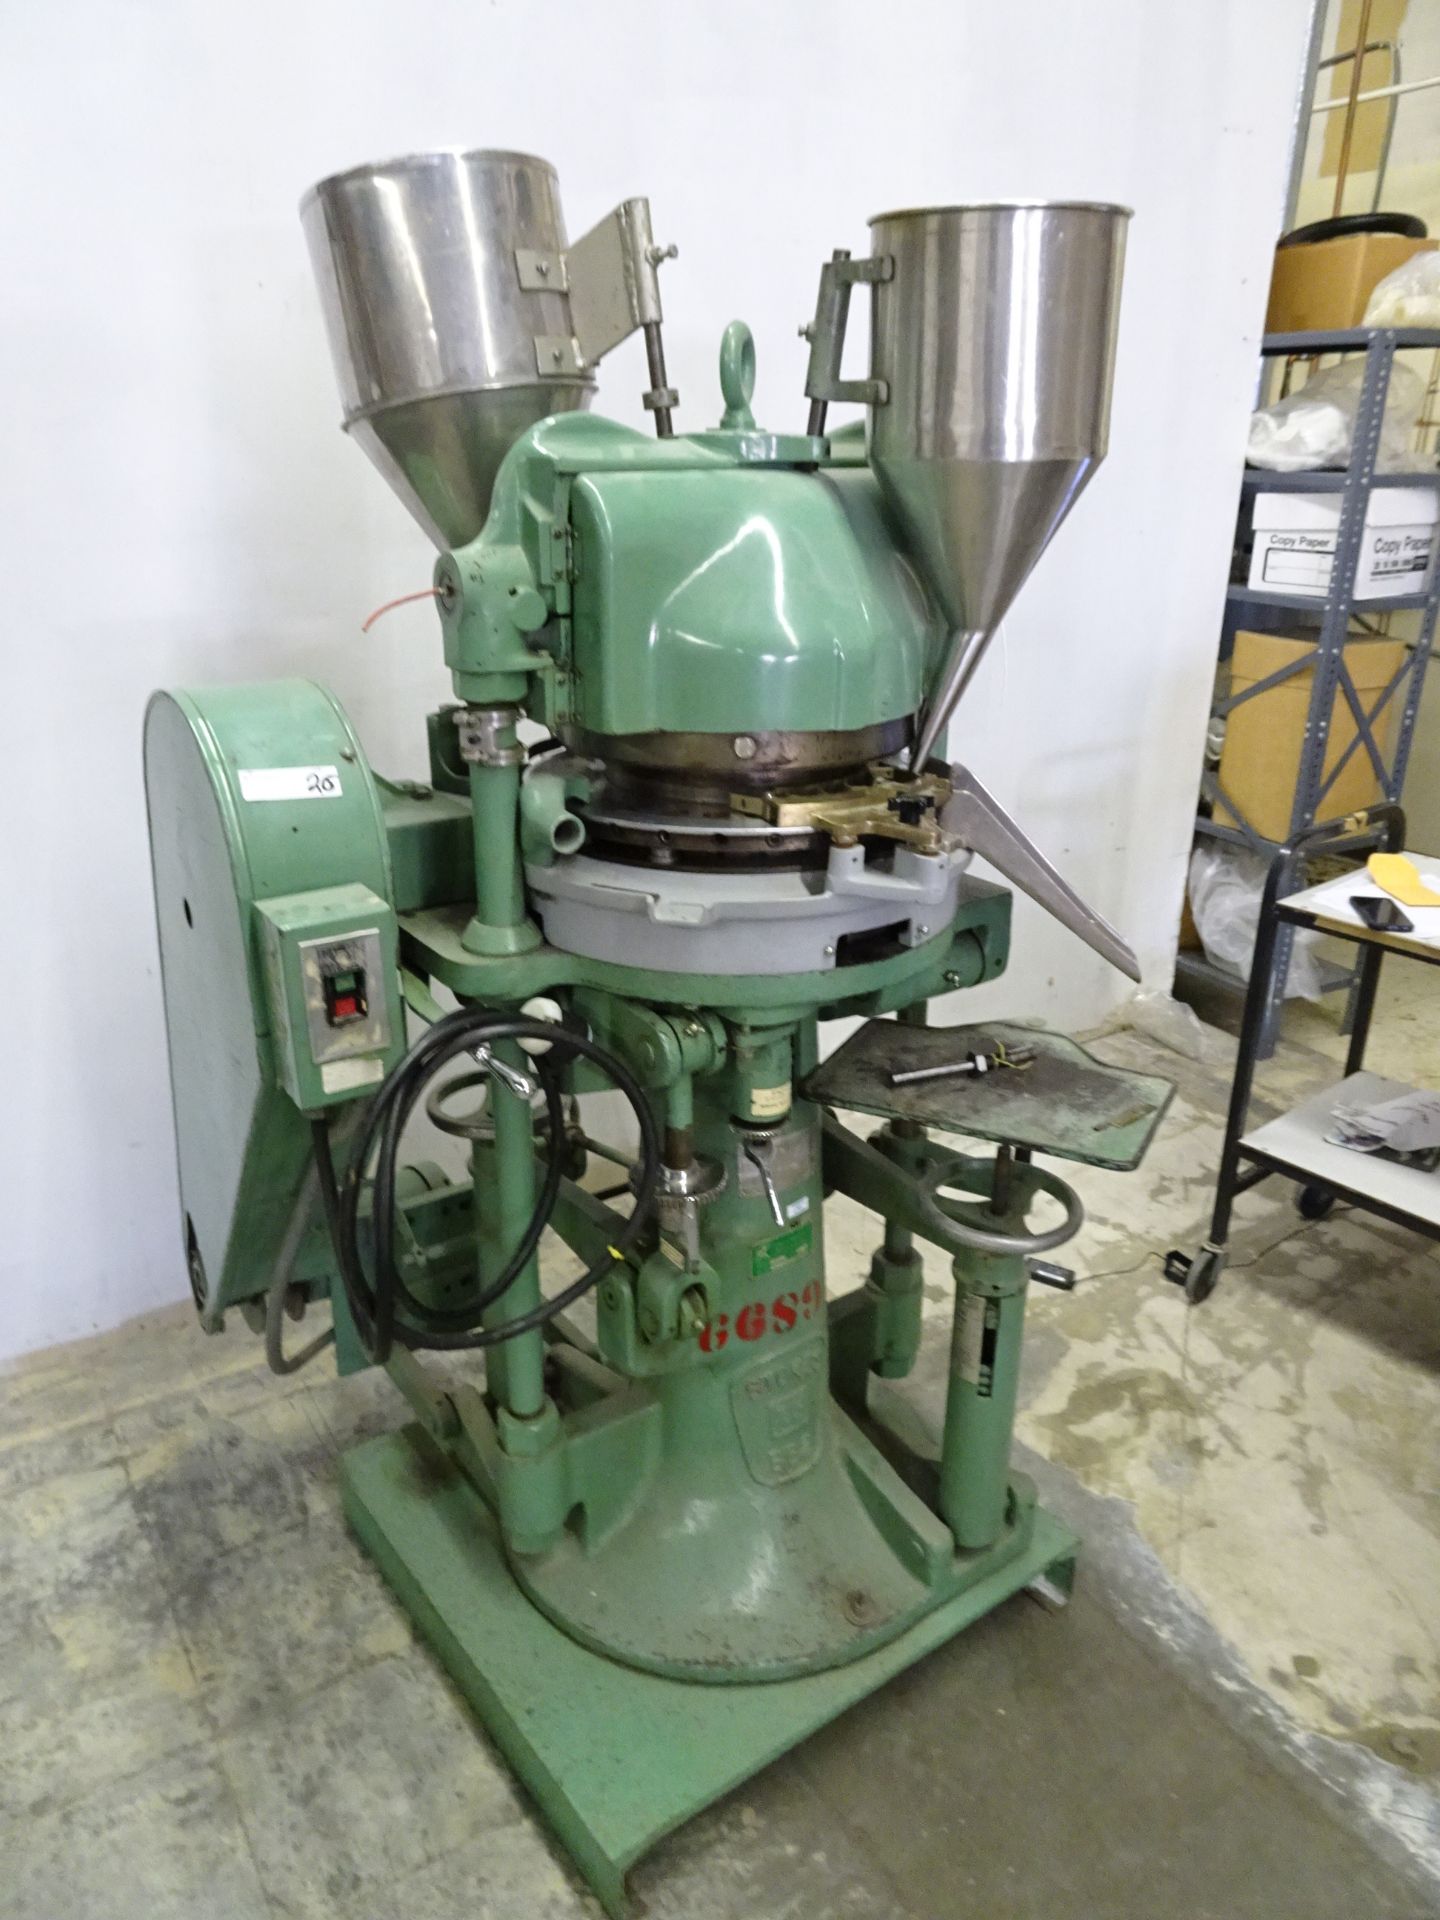 F.J. Stokes BB2 Tablet Press, Model 313-1 s/n T42054 1.5 Ton 24 Station Turret, (2) Feed Stations